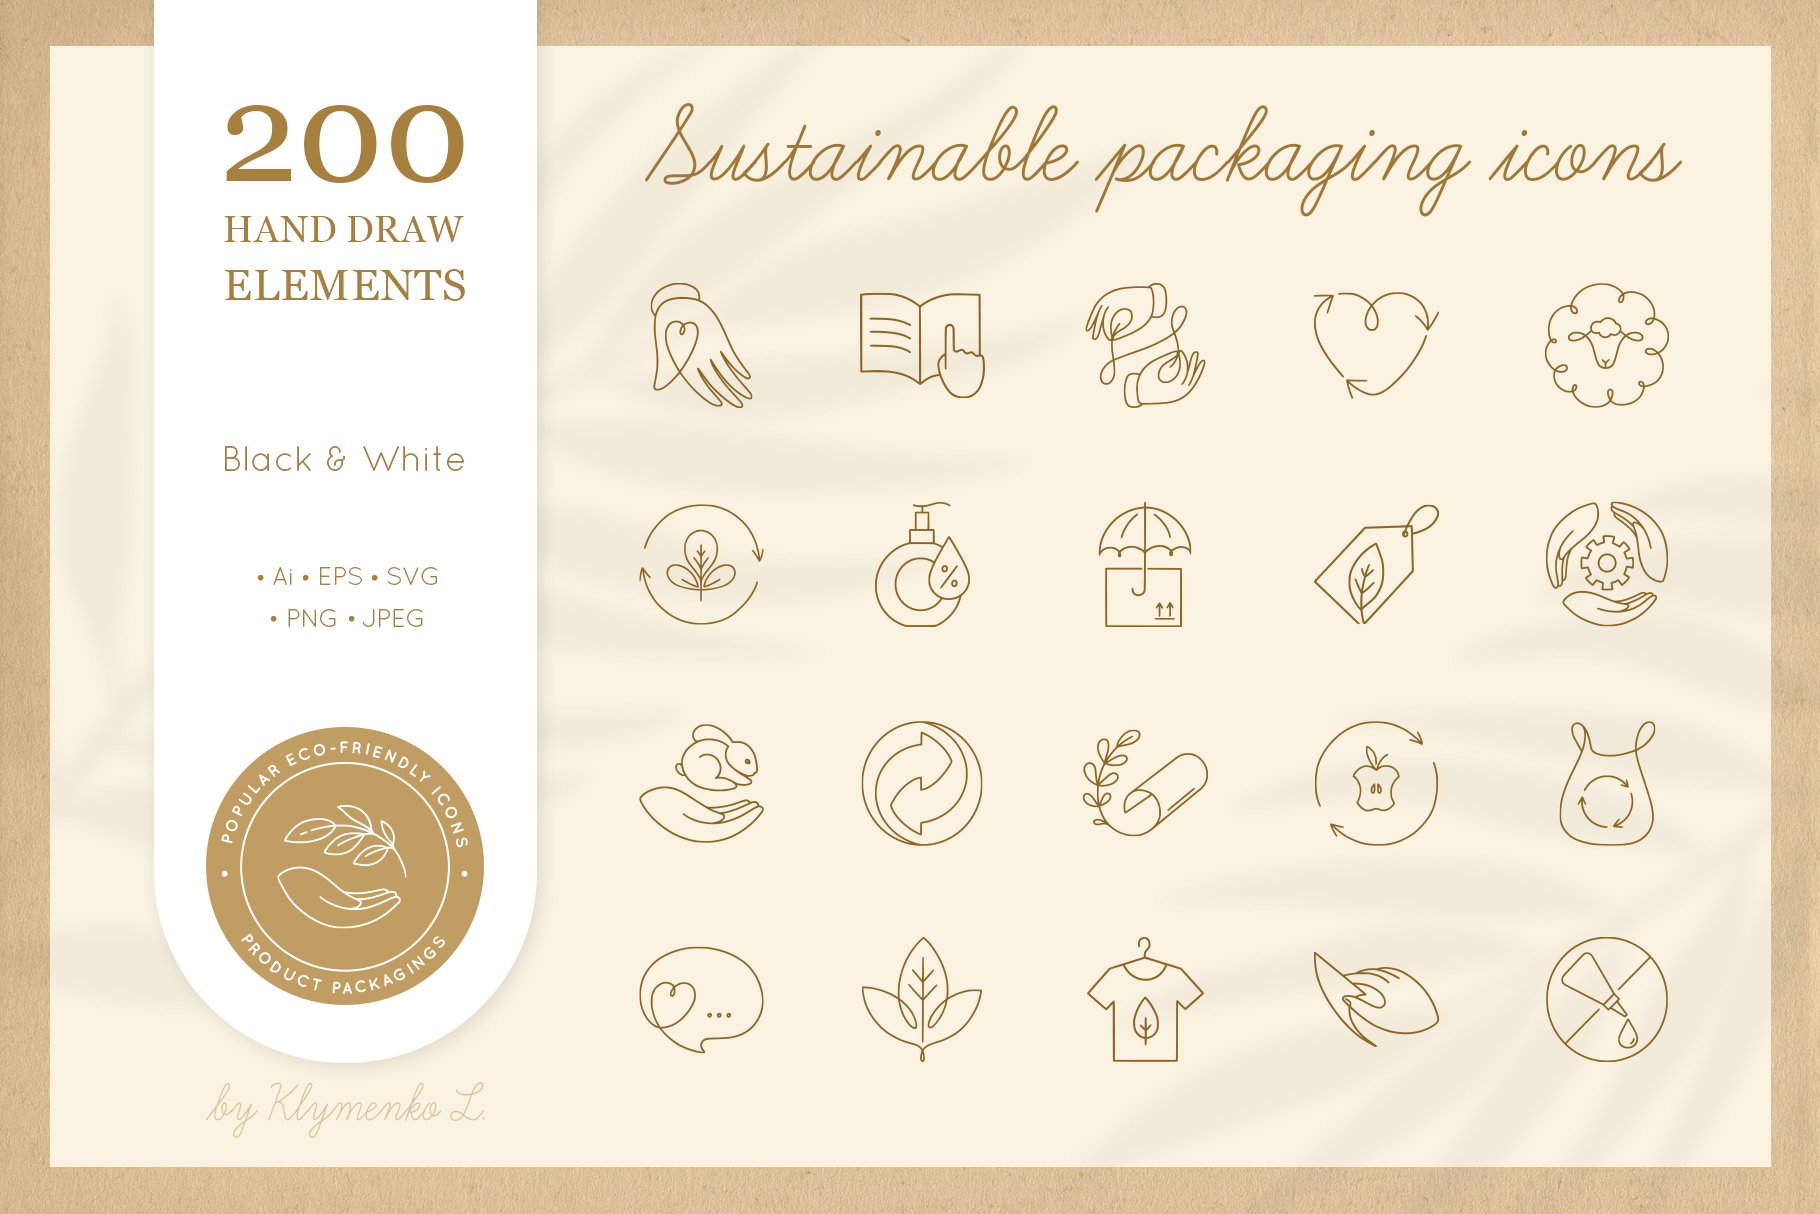 Sustainable Packaging Icons cover image.